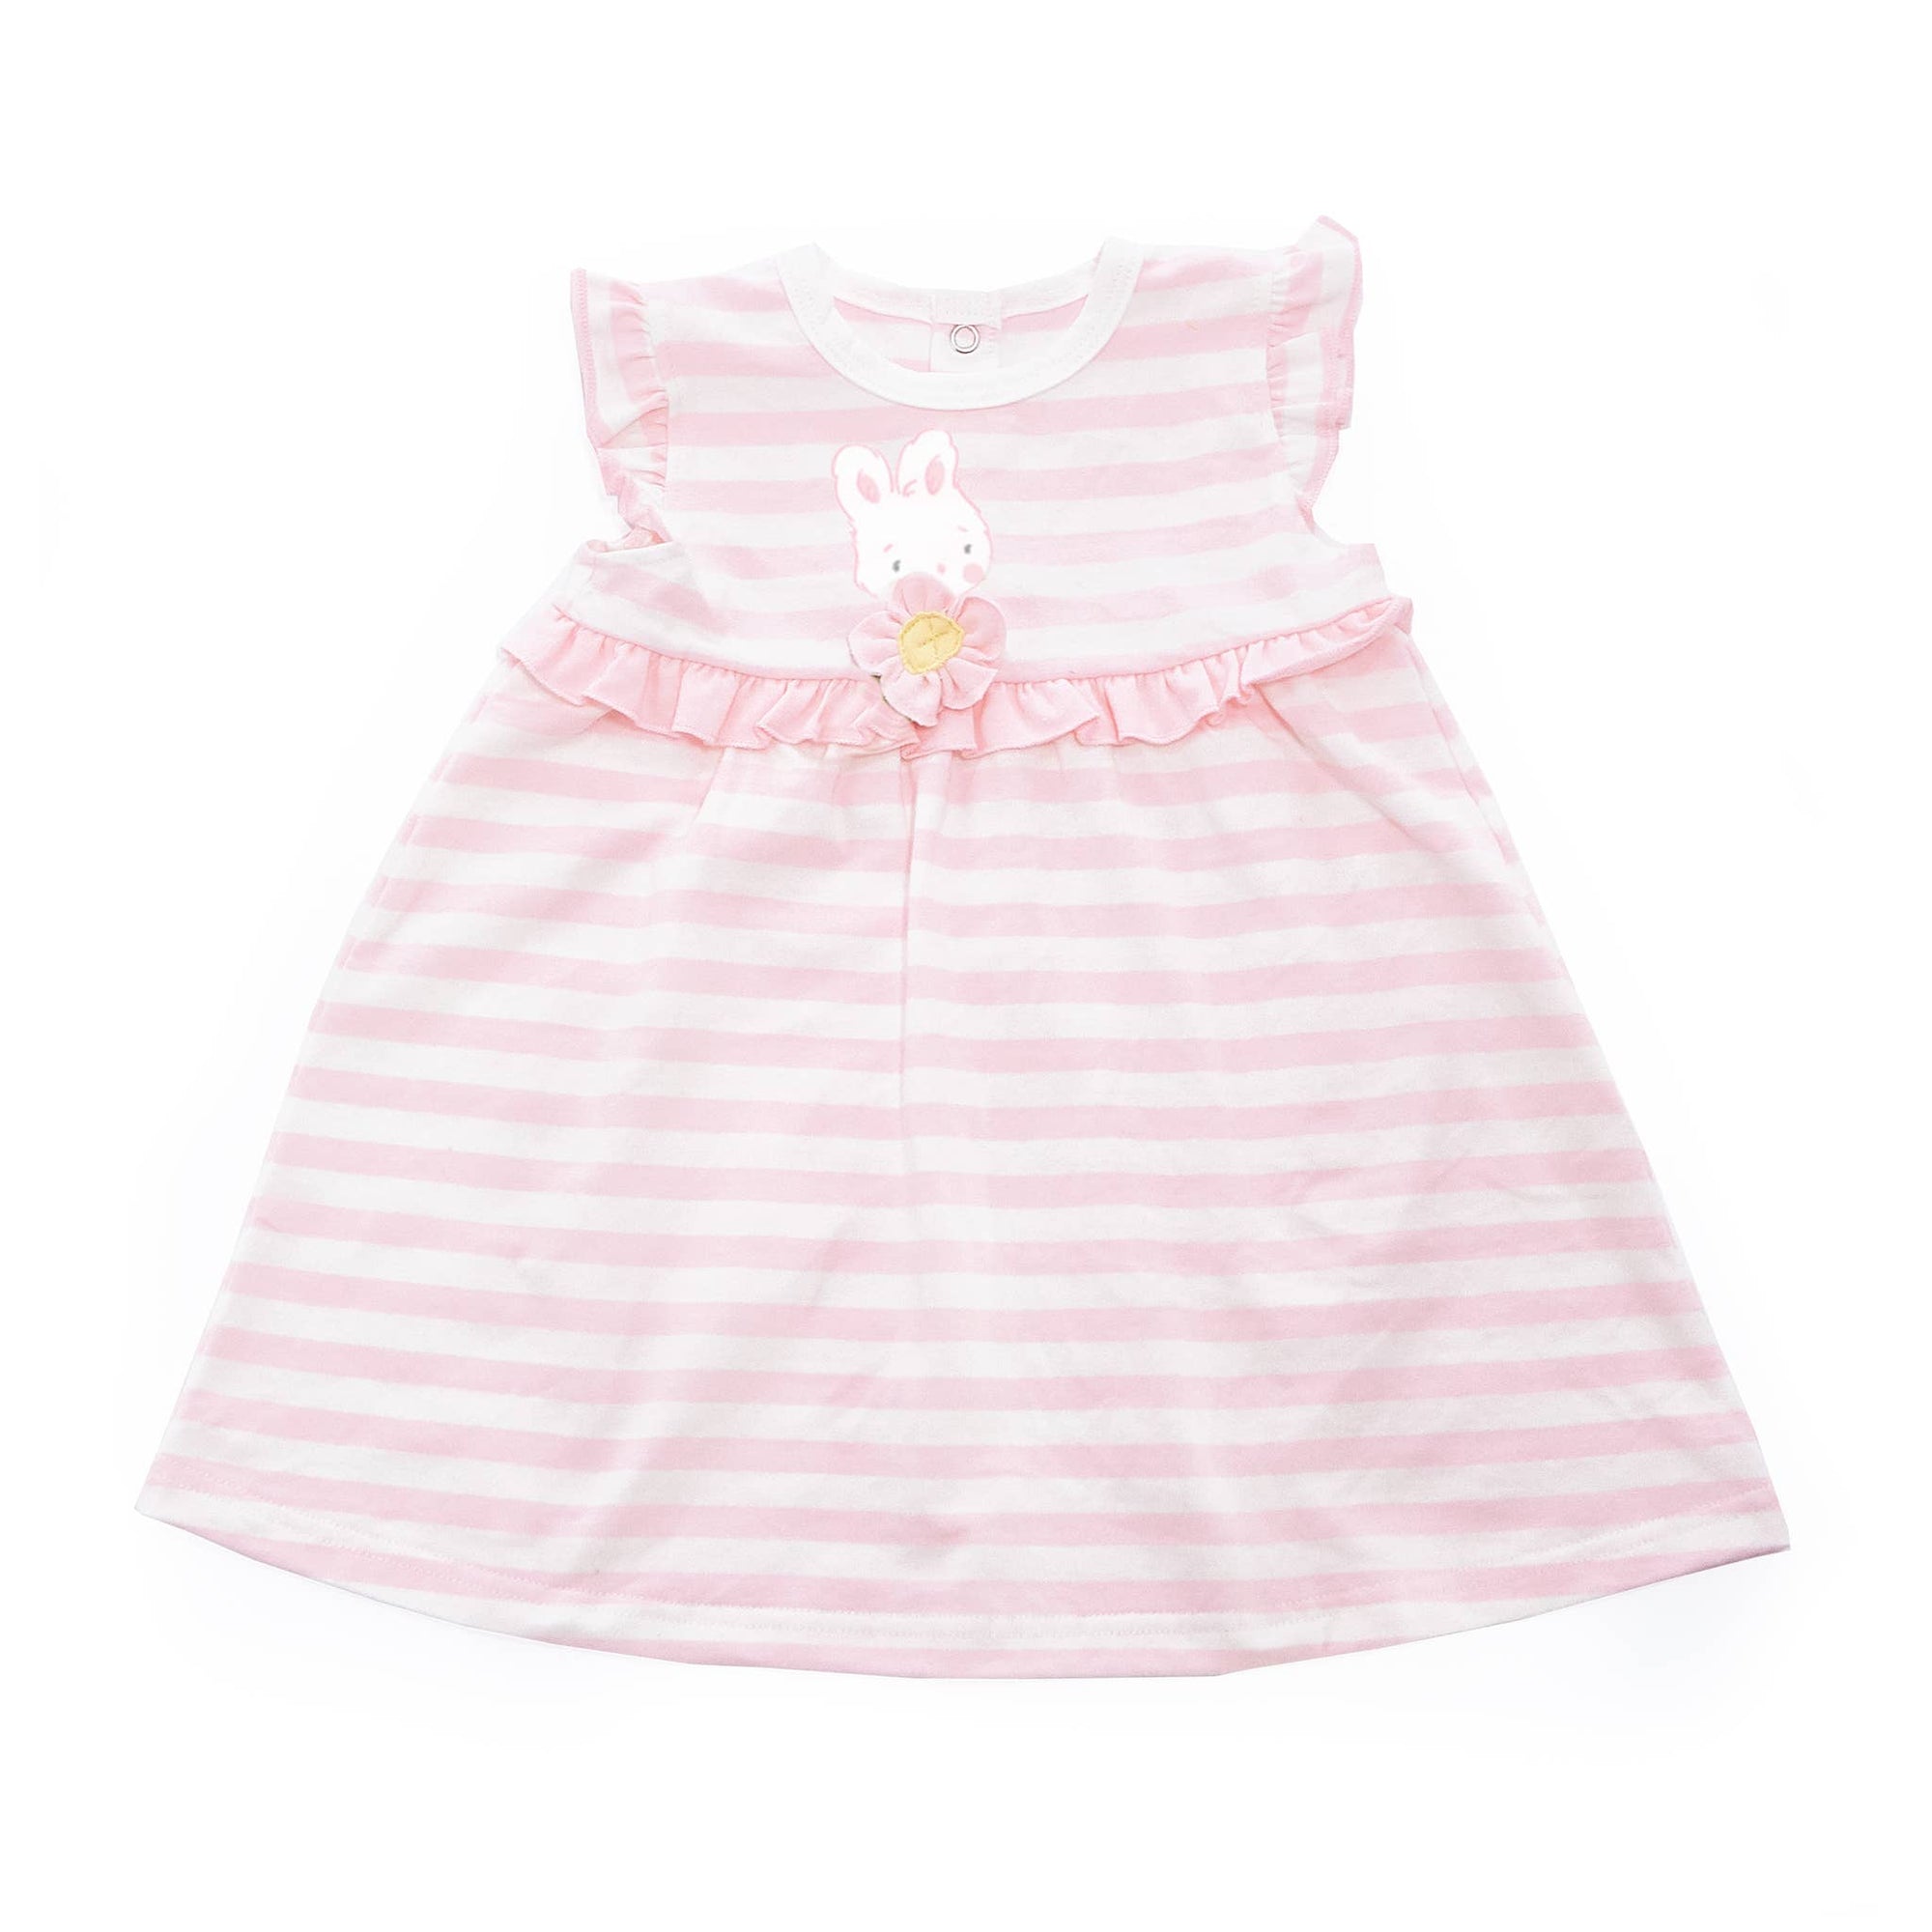 Bunnies By the Bay - Blossom Striped Dress